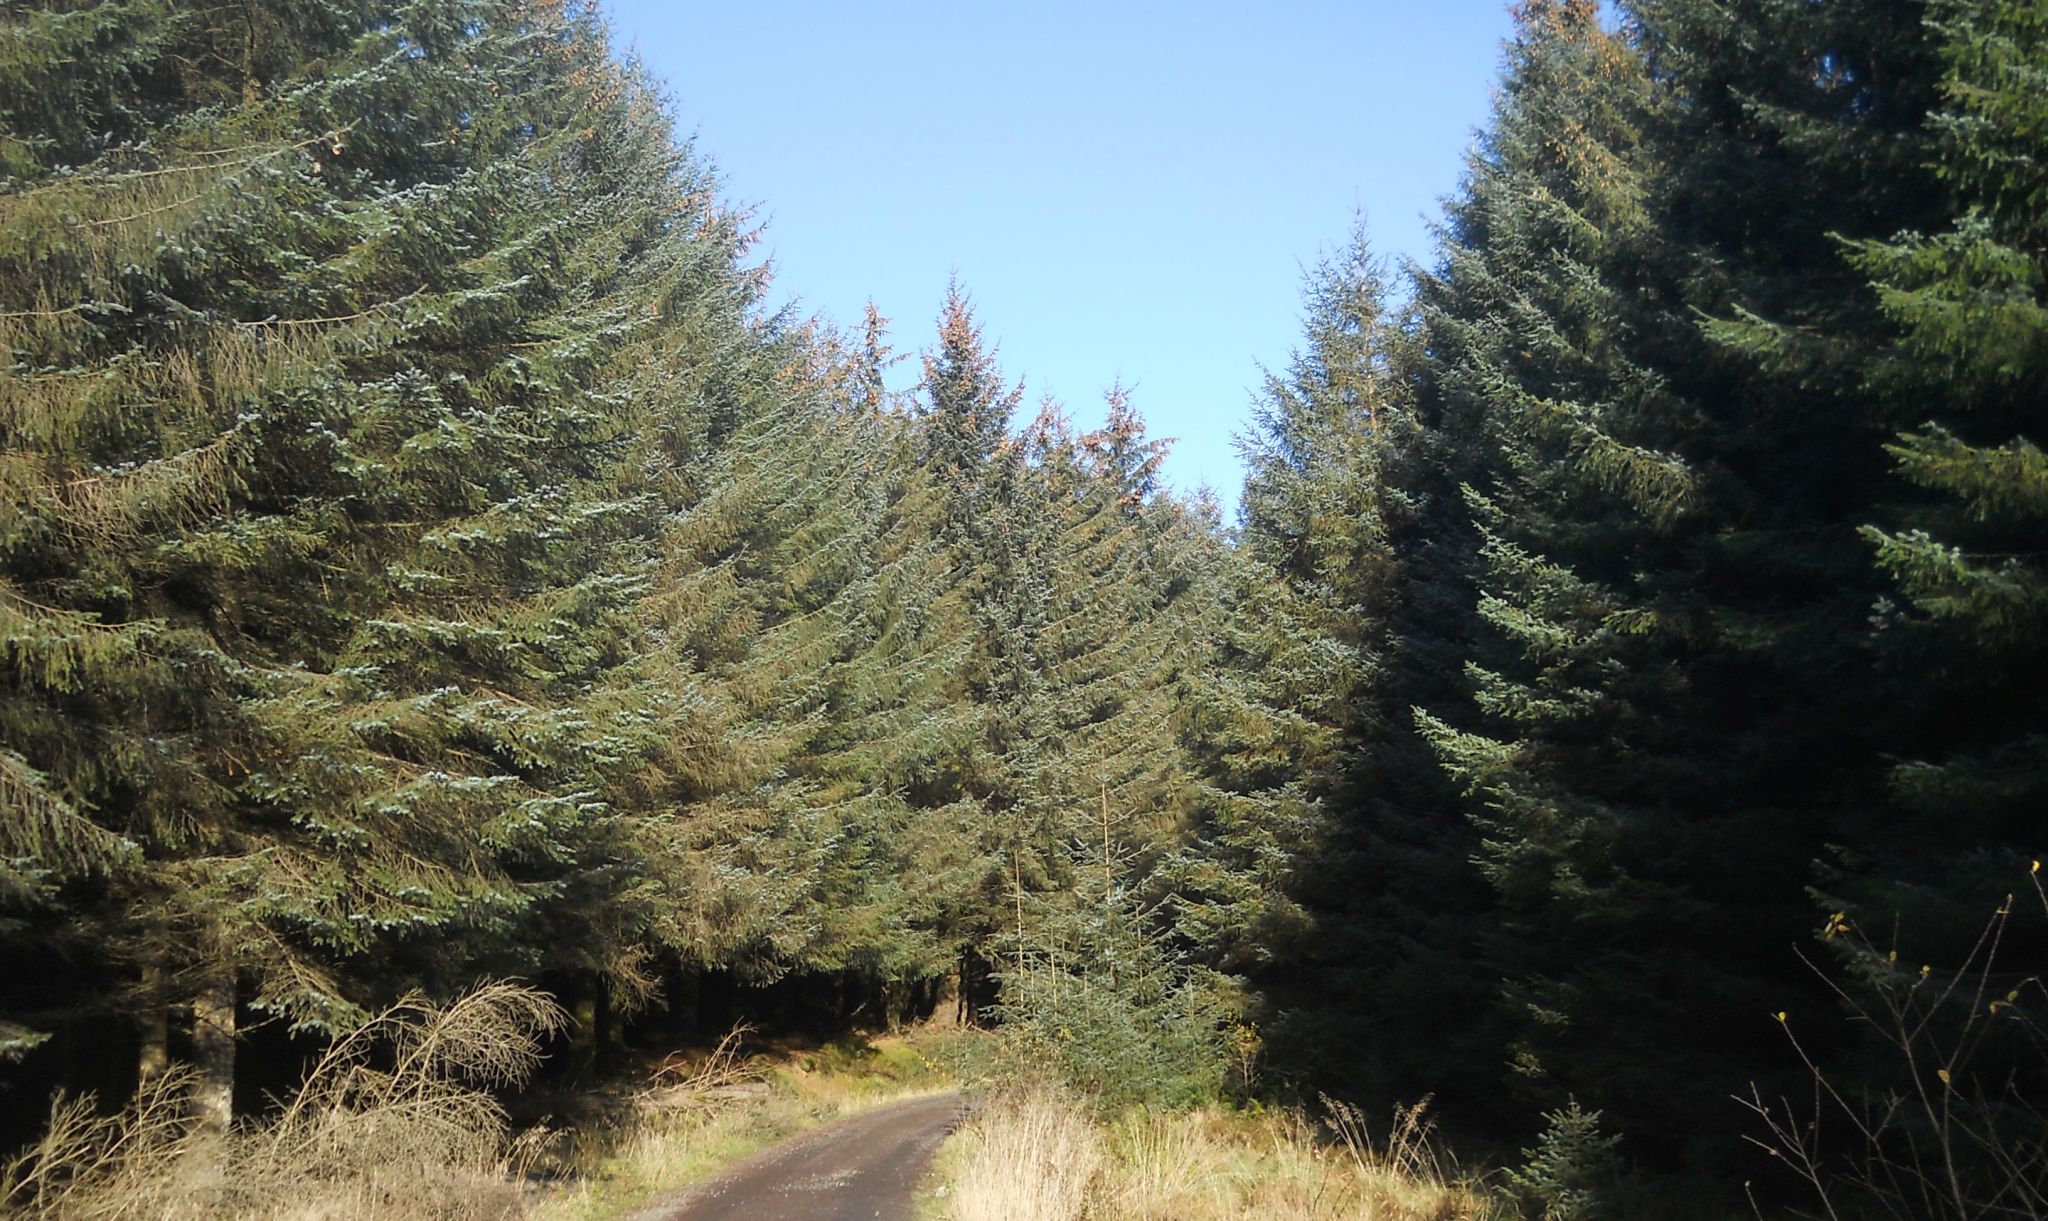 Forestry plantation on approach to Burncrooks Reservoir